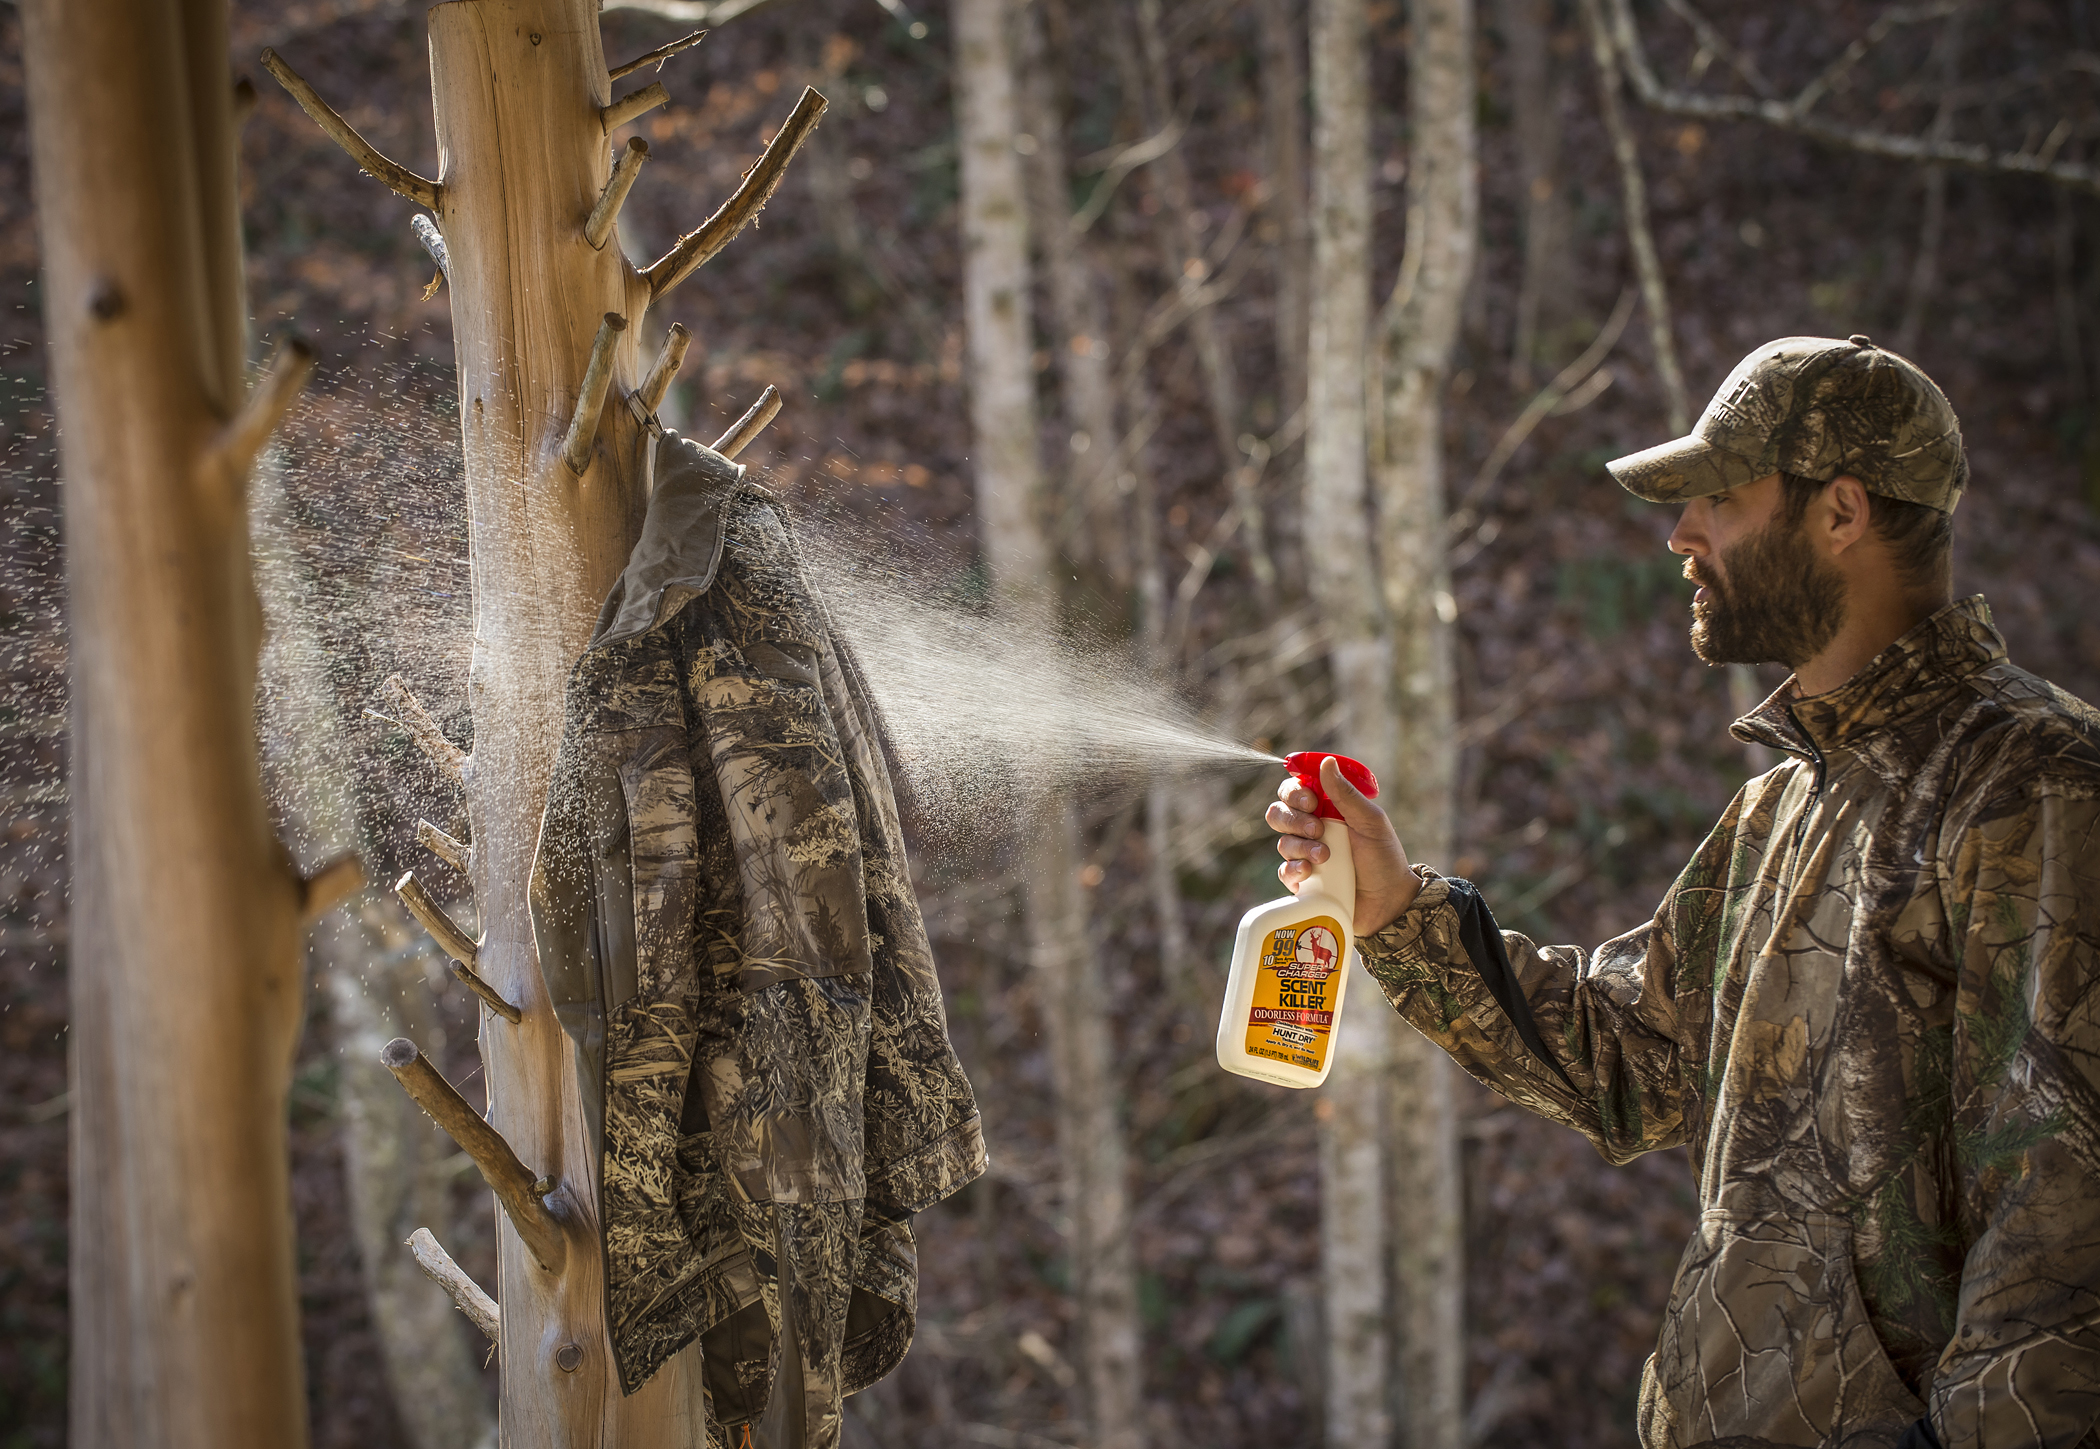 Dead Down Wind  Hunting Scent Blockers & Removers